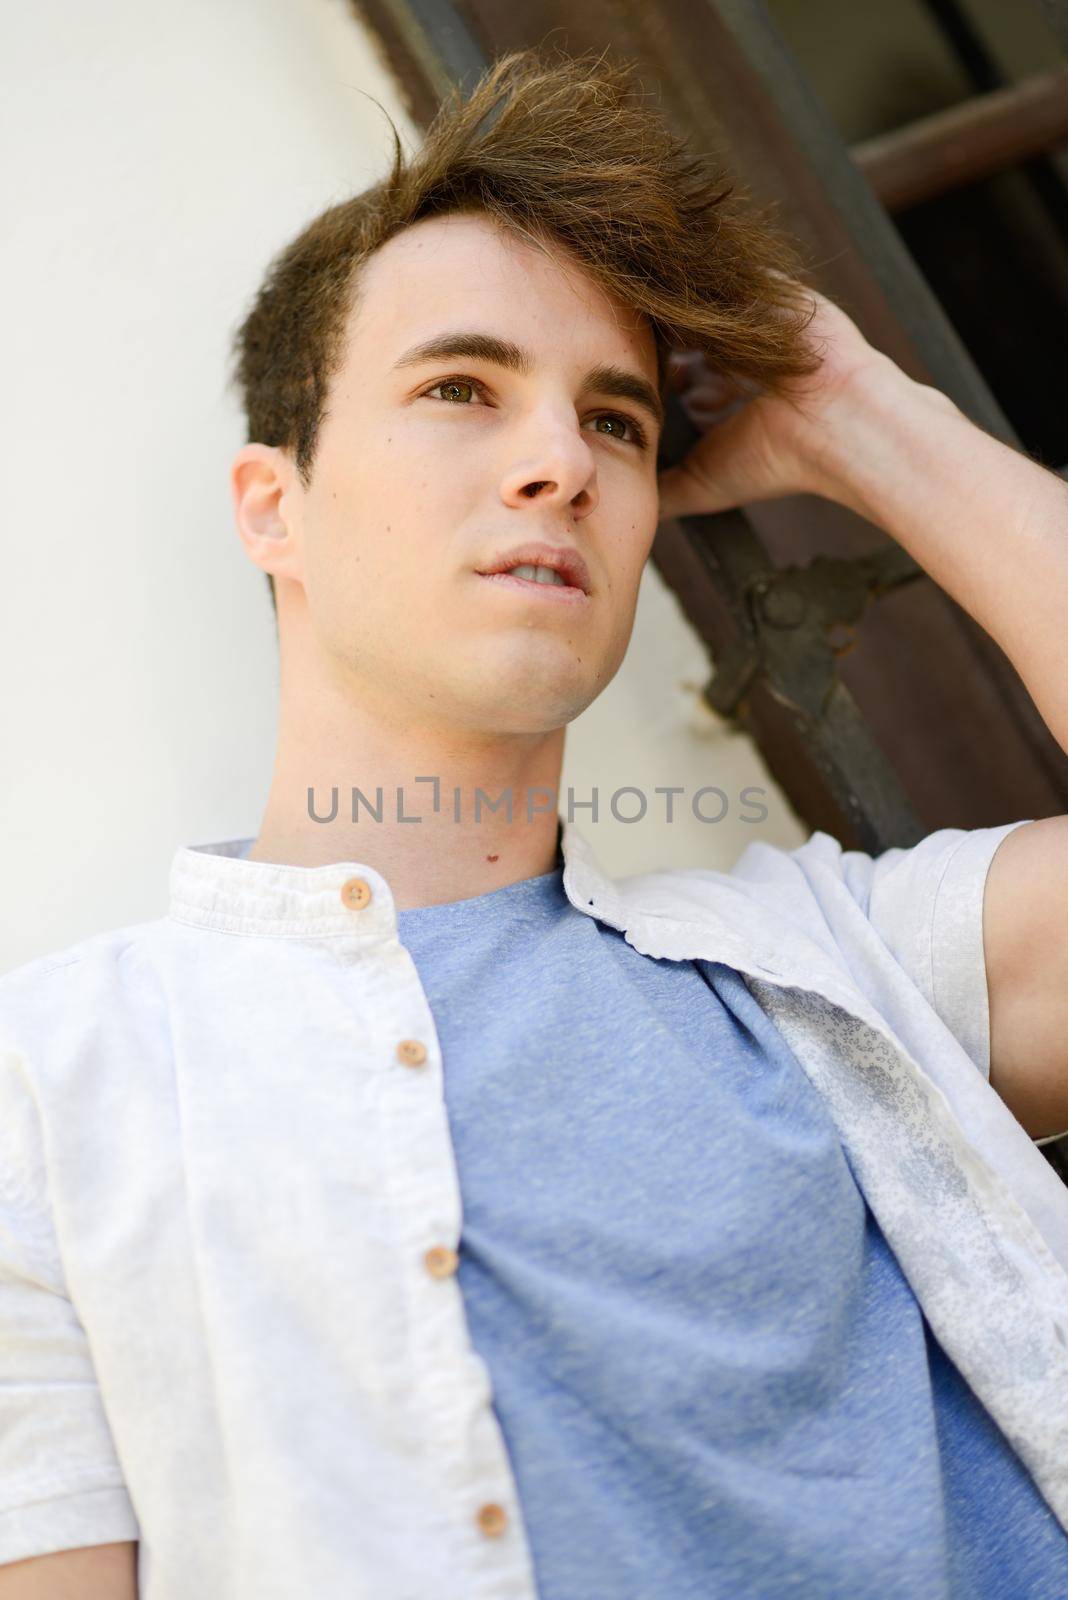 Portrait of attractive young man in urban background